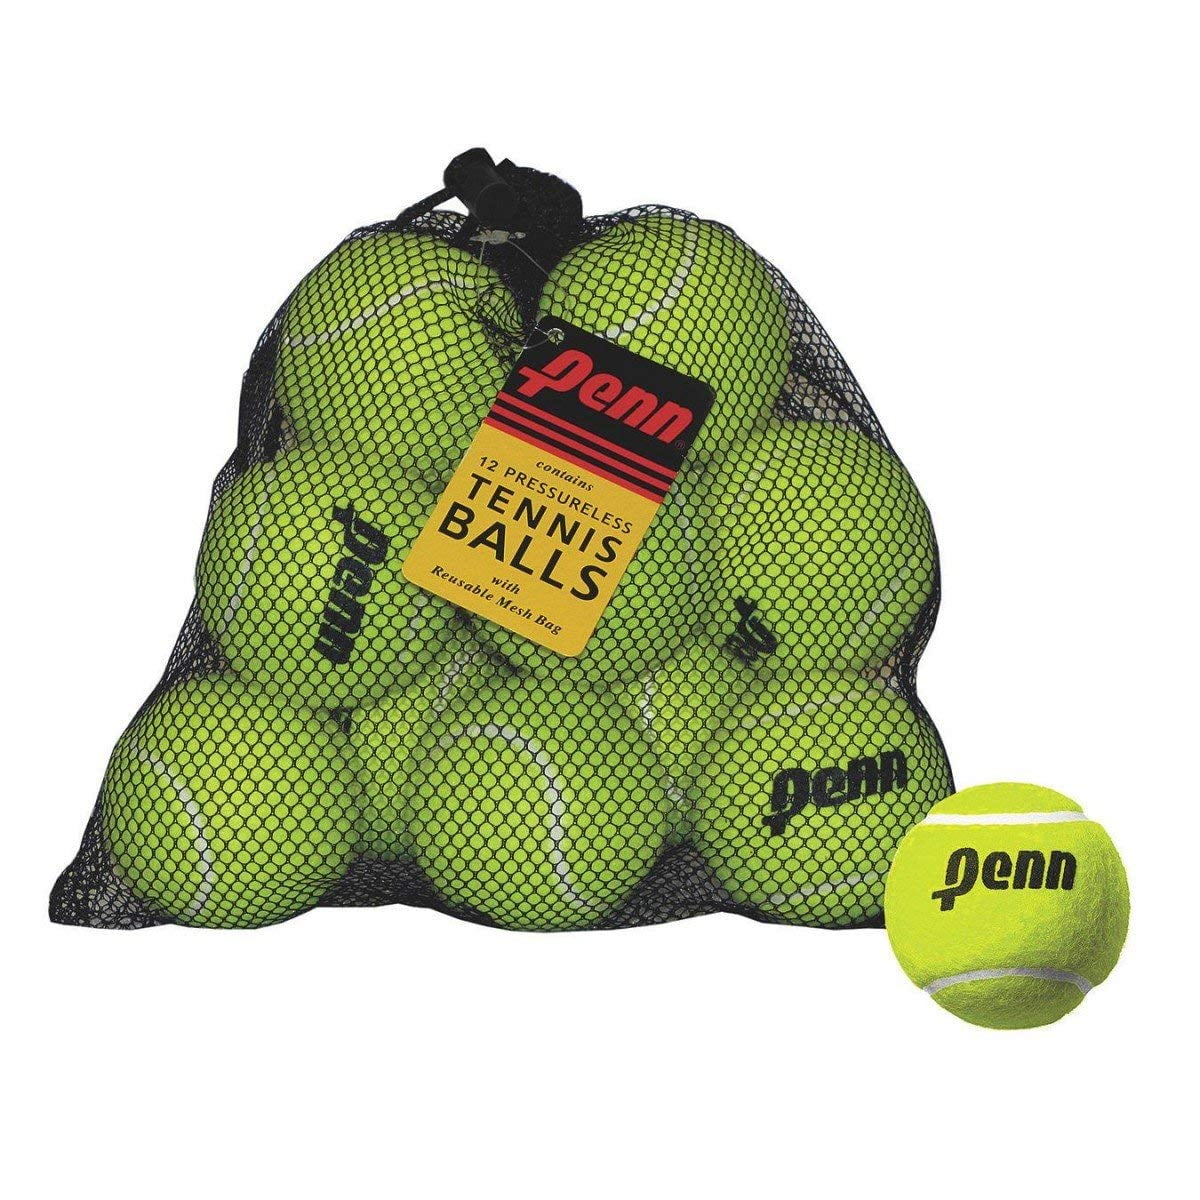 Come with Mesh Carry Bag 15 Pack Practice Tennis Balls for Beginners Training Playing Tennis Balls for Dogs HPWFHPLF Tennis Balls 